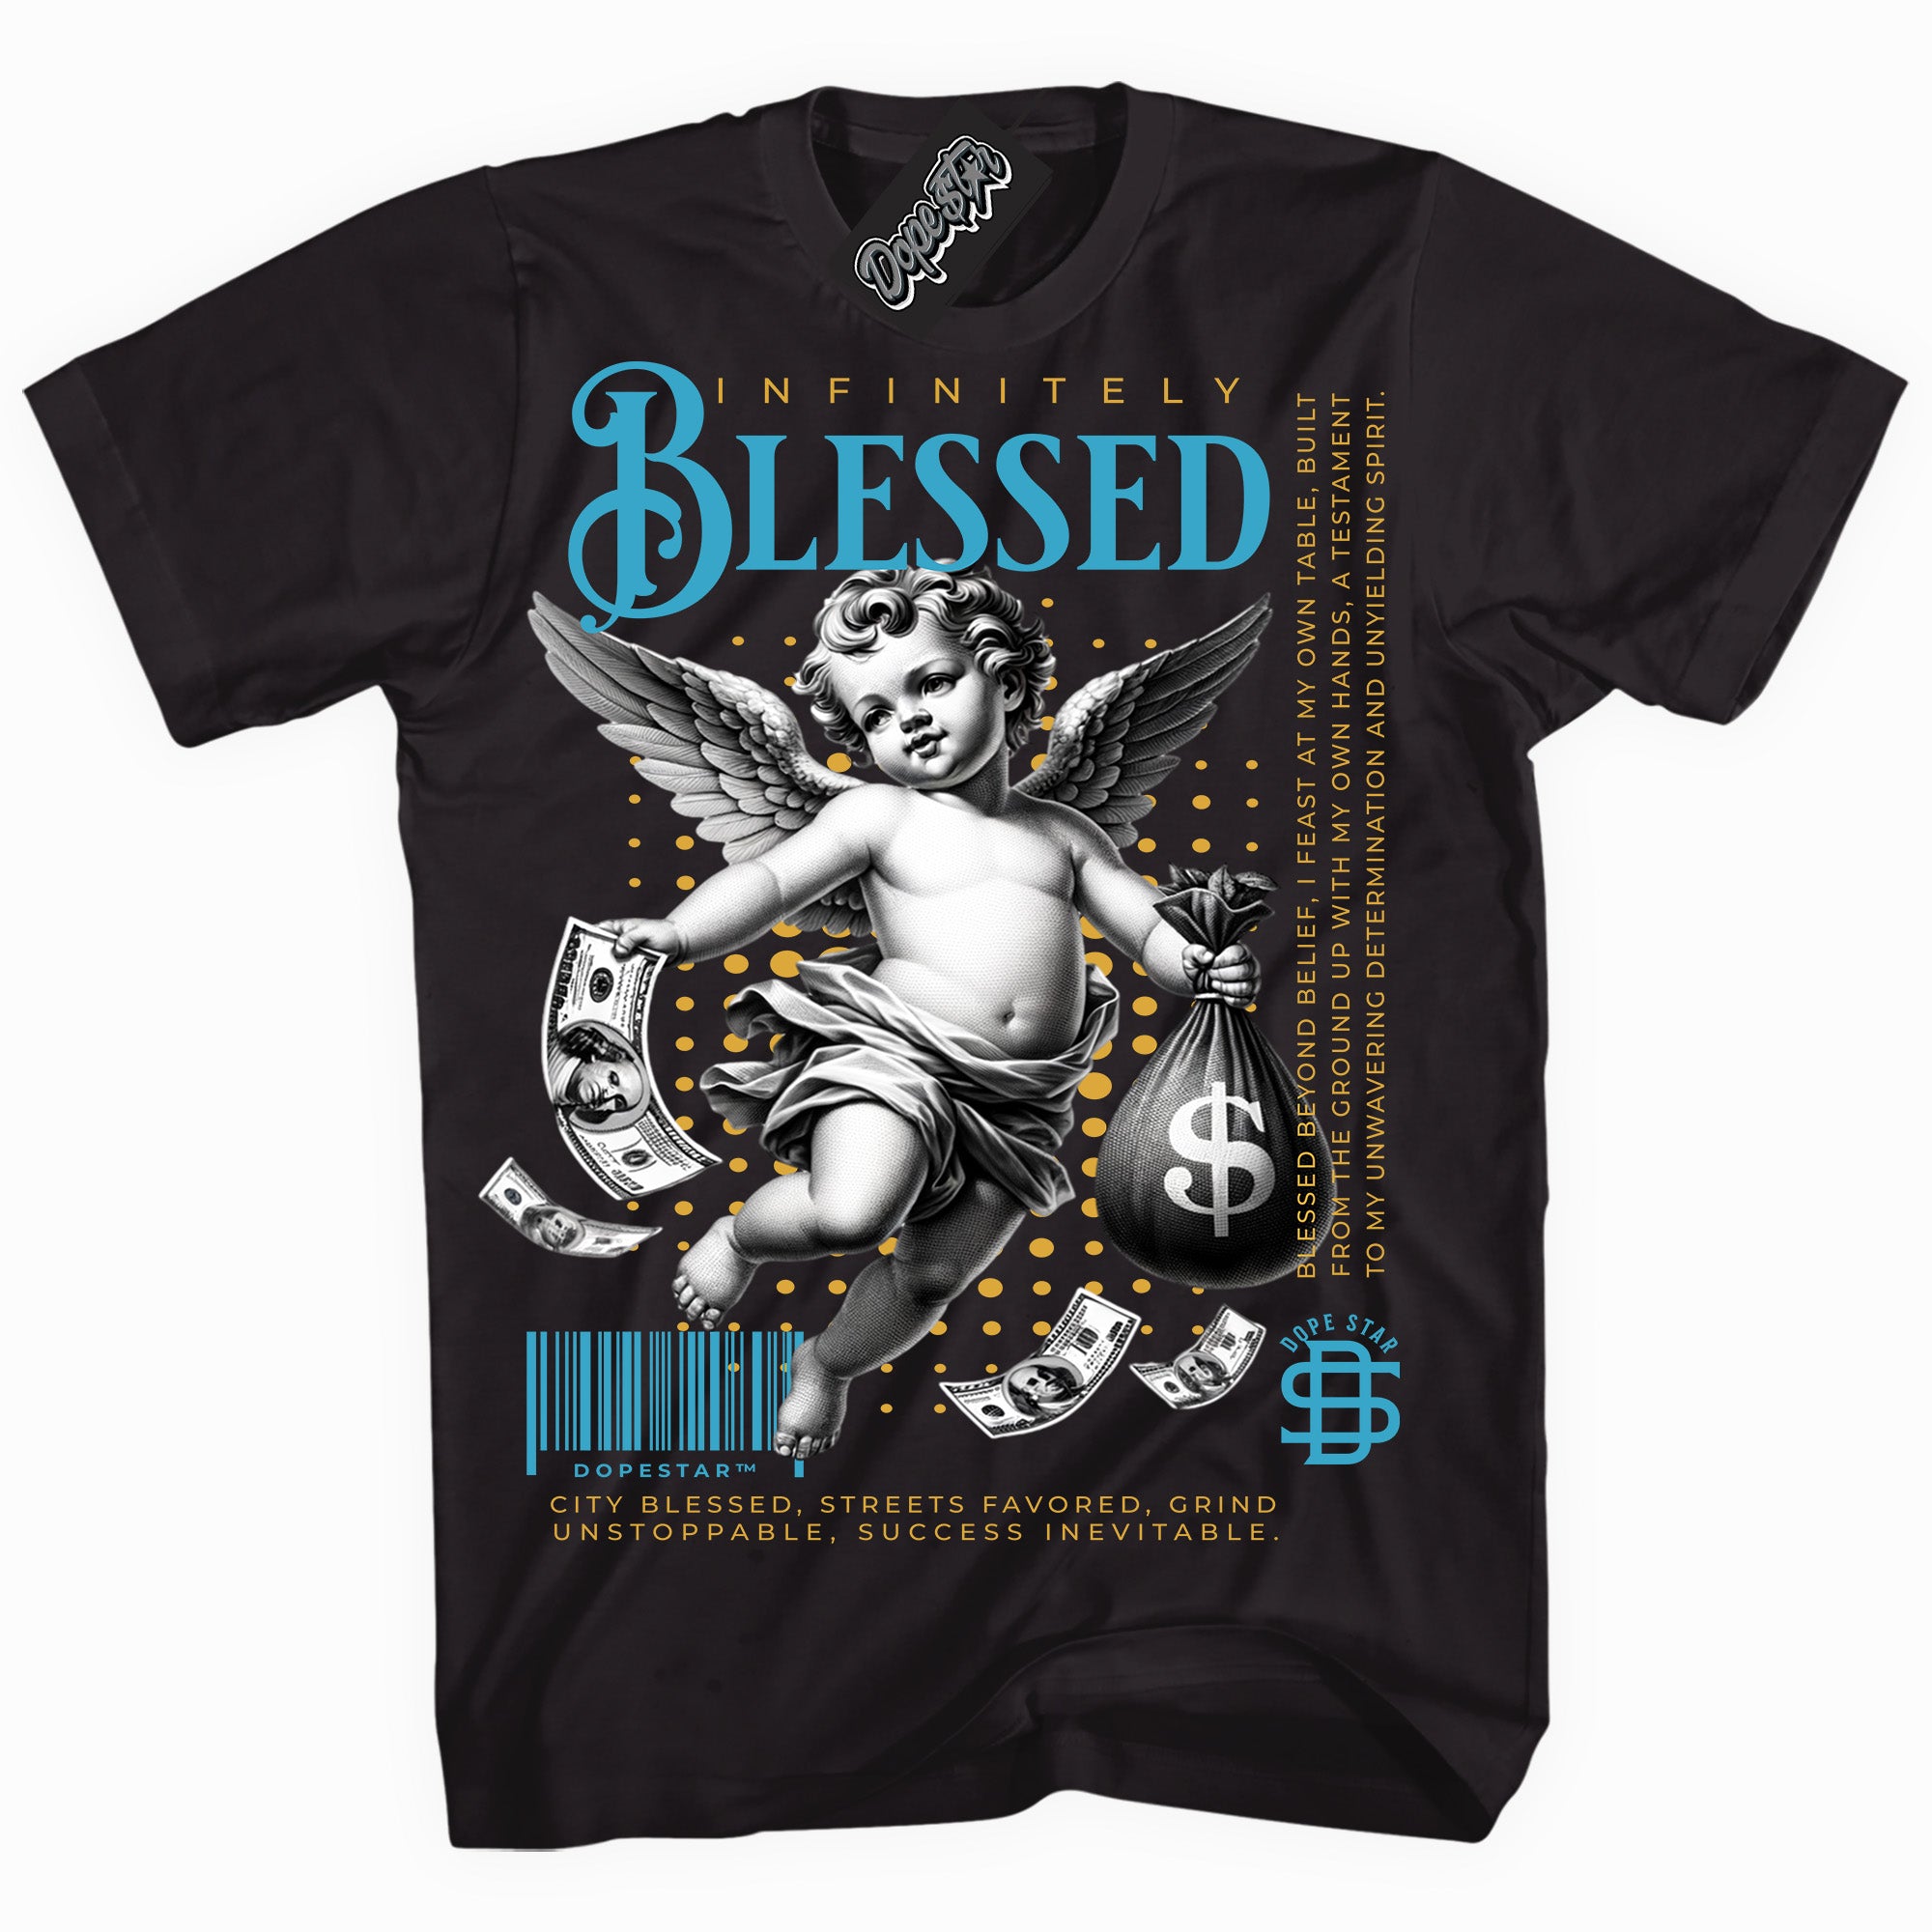 Cool Black graphic tee with “ Infinitely Blessed ” print, that perfectly matches AQUA 5s sneakers 